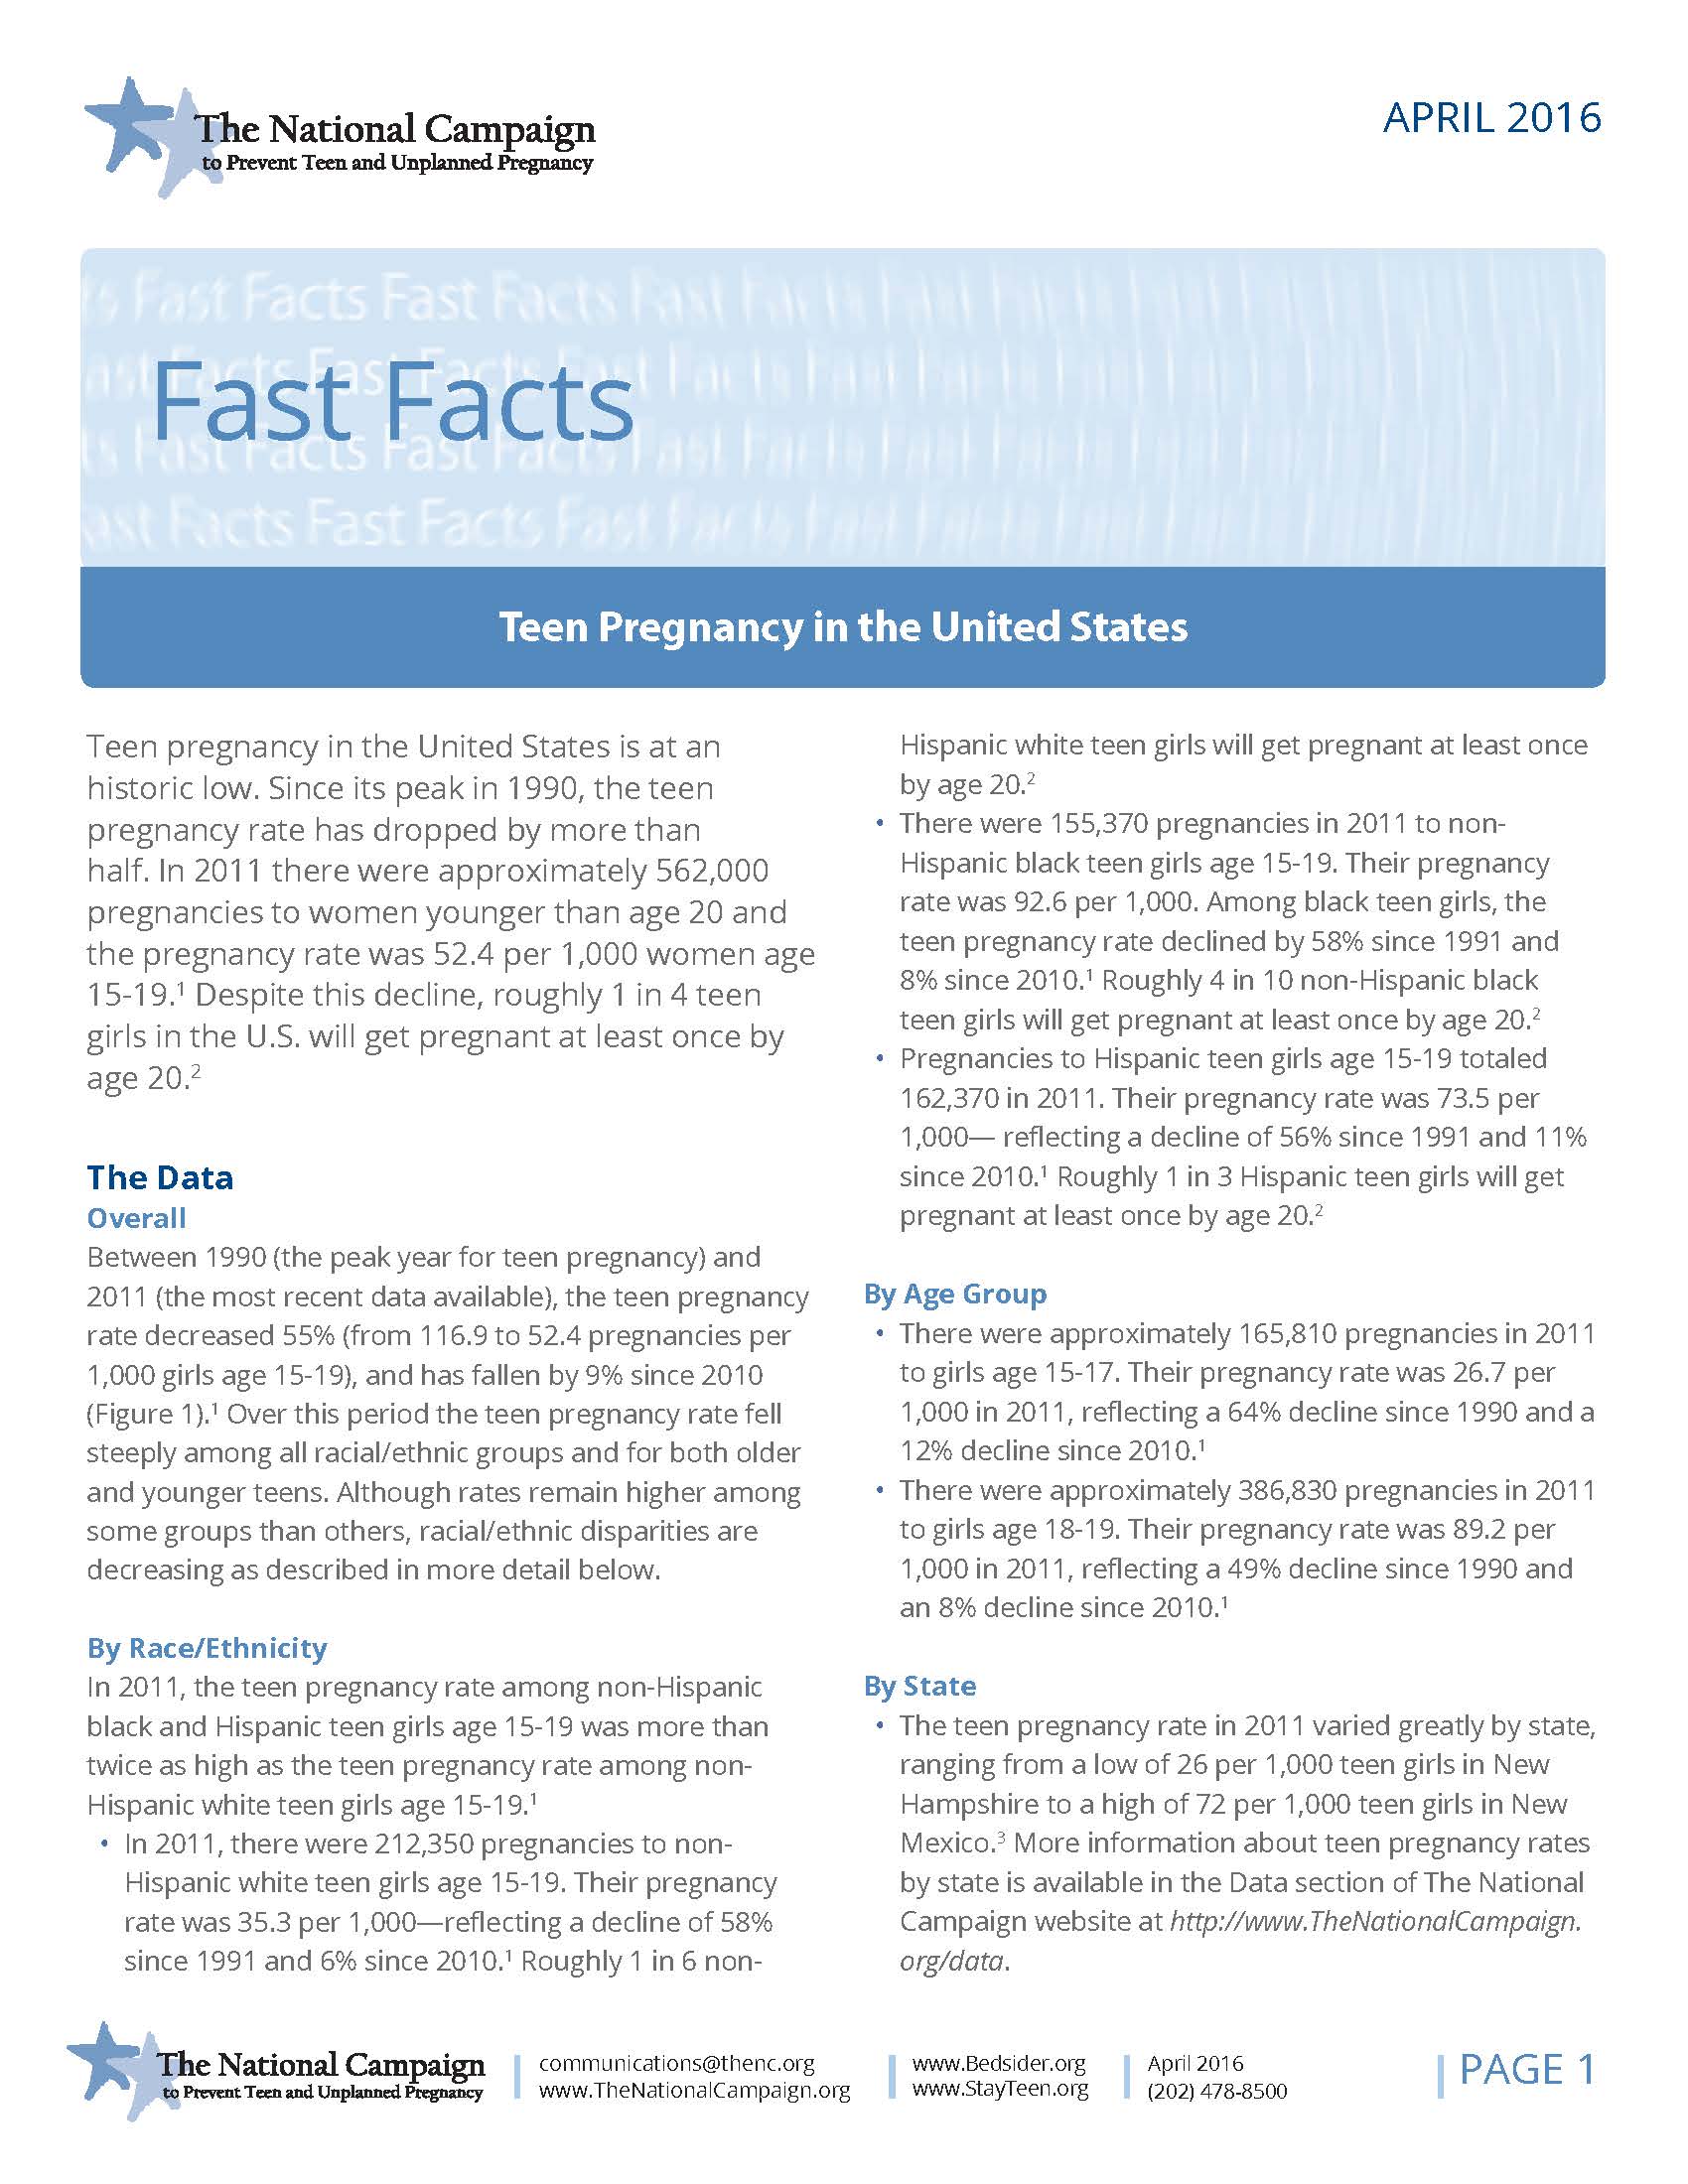 Fast Facts: Teen Pregnancy in the United States